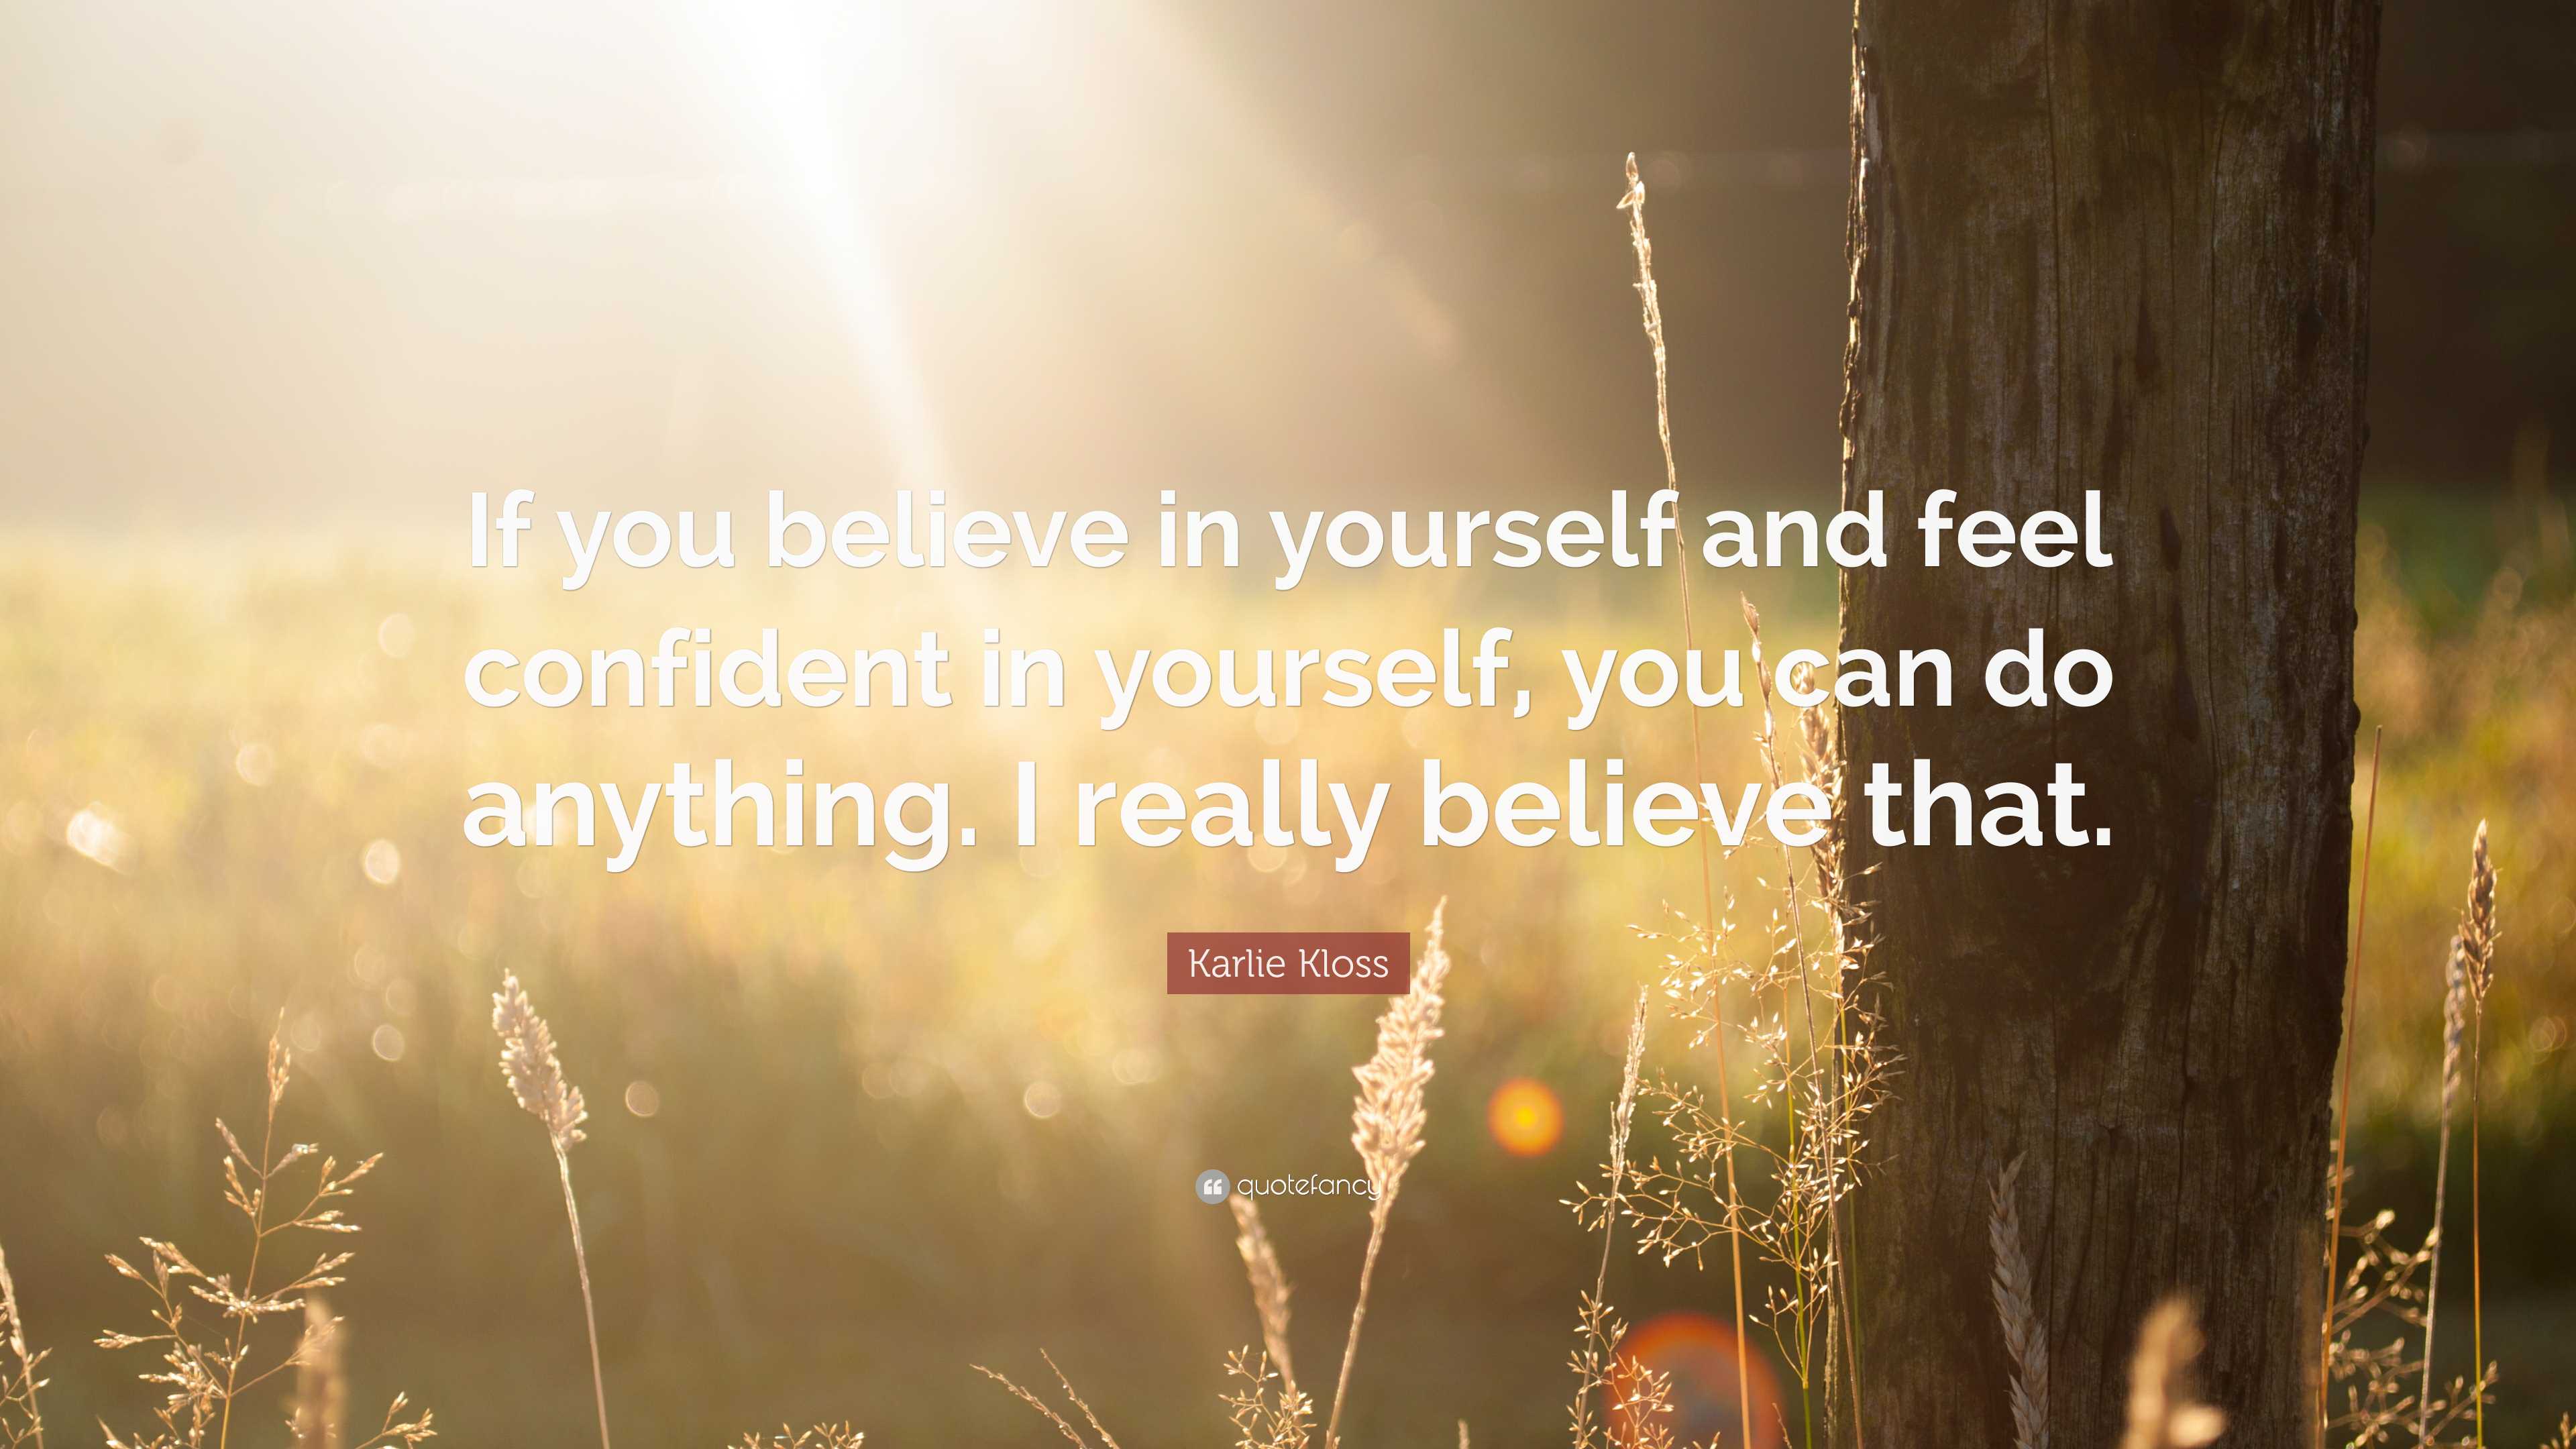 ❤️🔥 Love yourself and believe that you can do it! ✨️ Belief